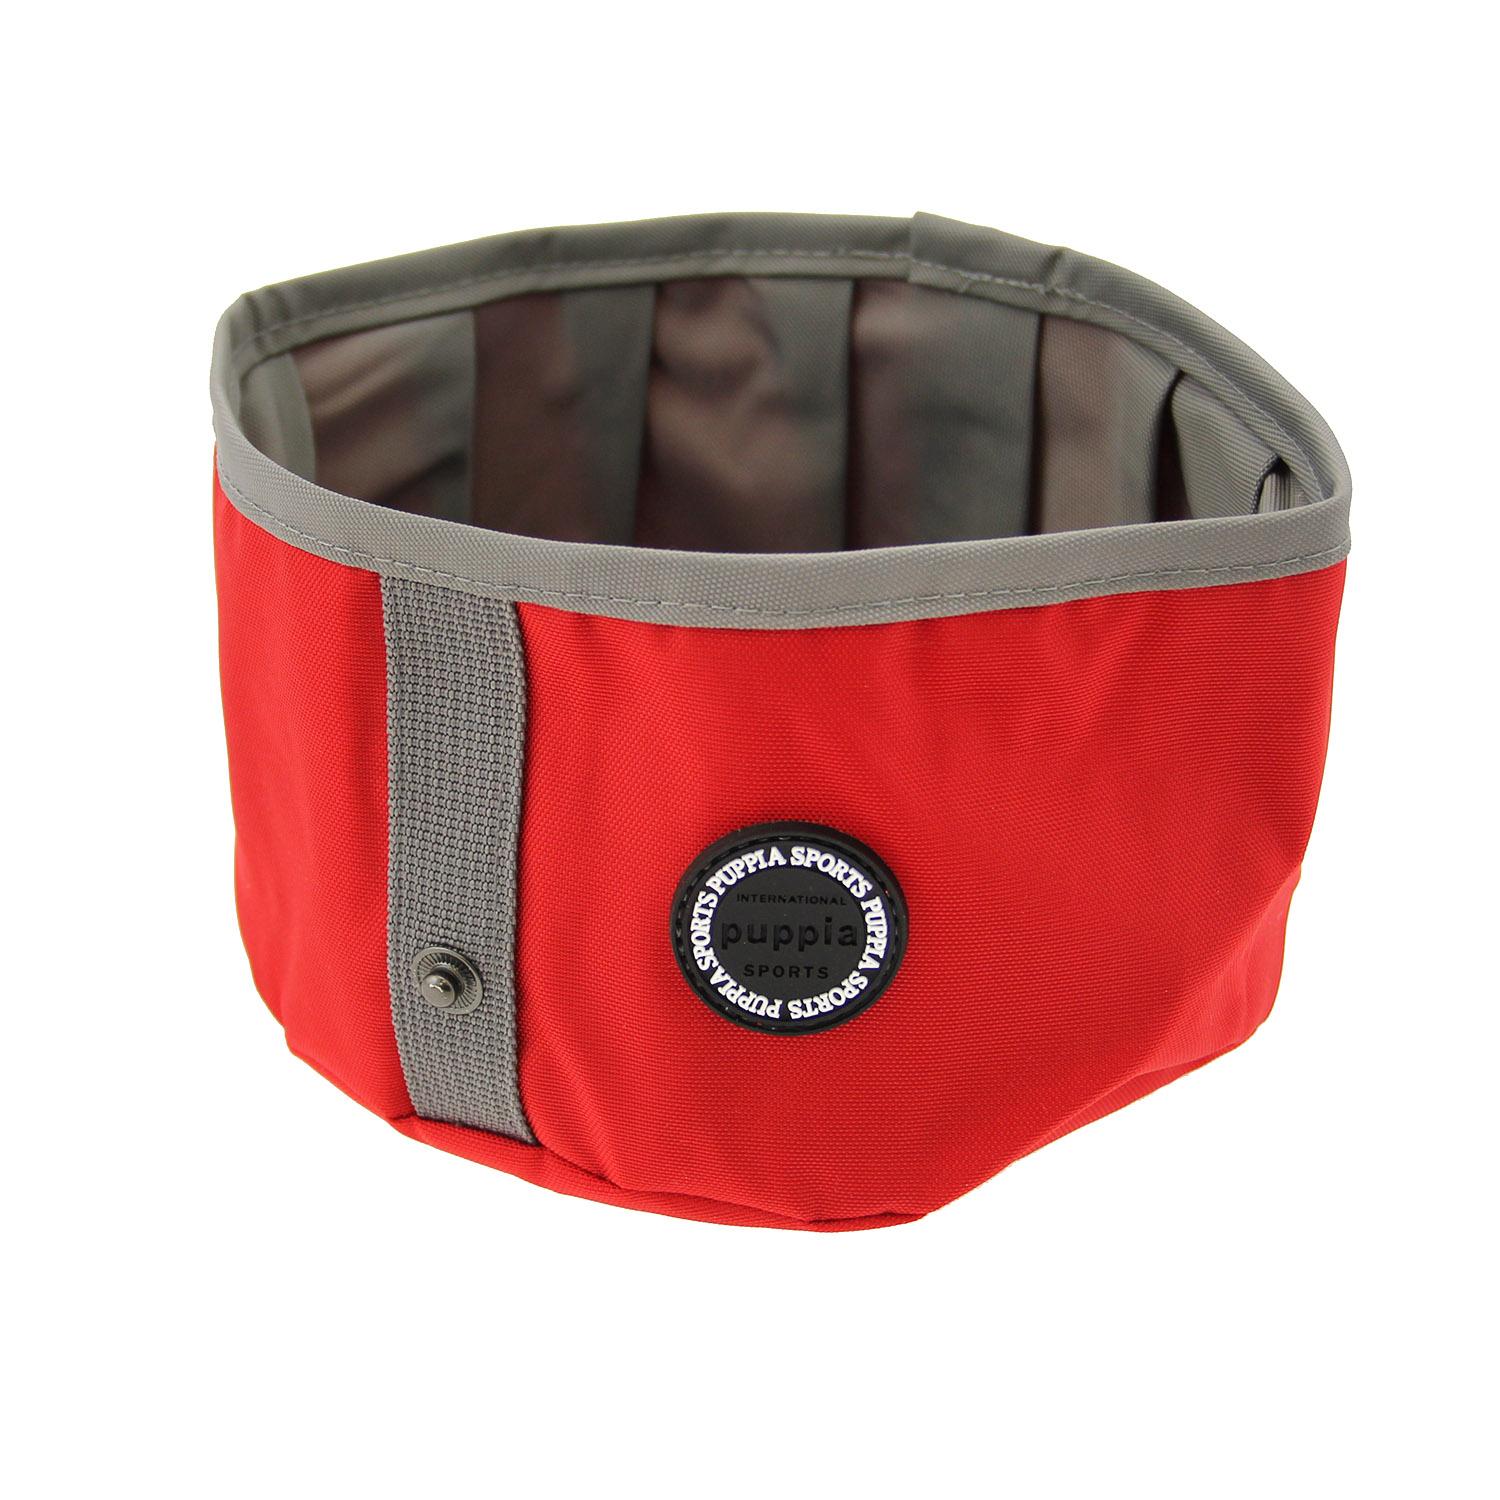 Trek Round Portable Bowl by Puppia Life - Red 